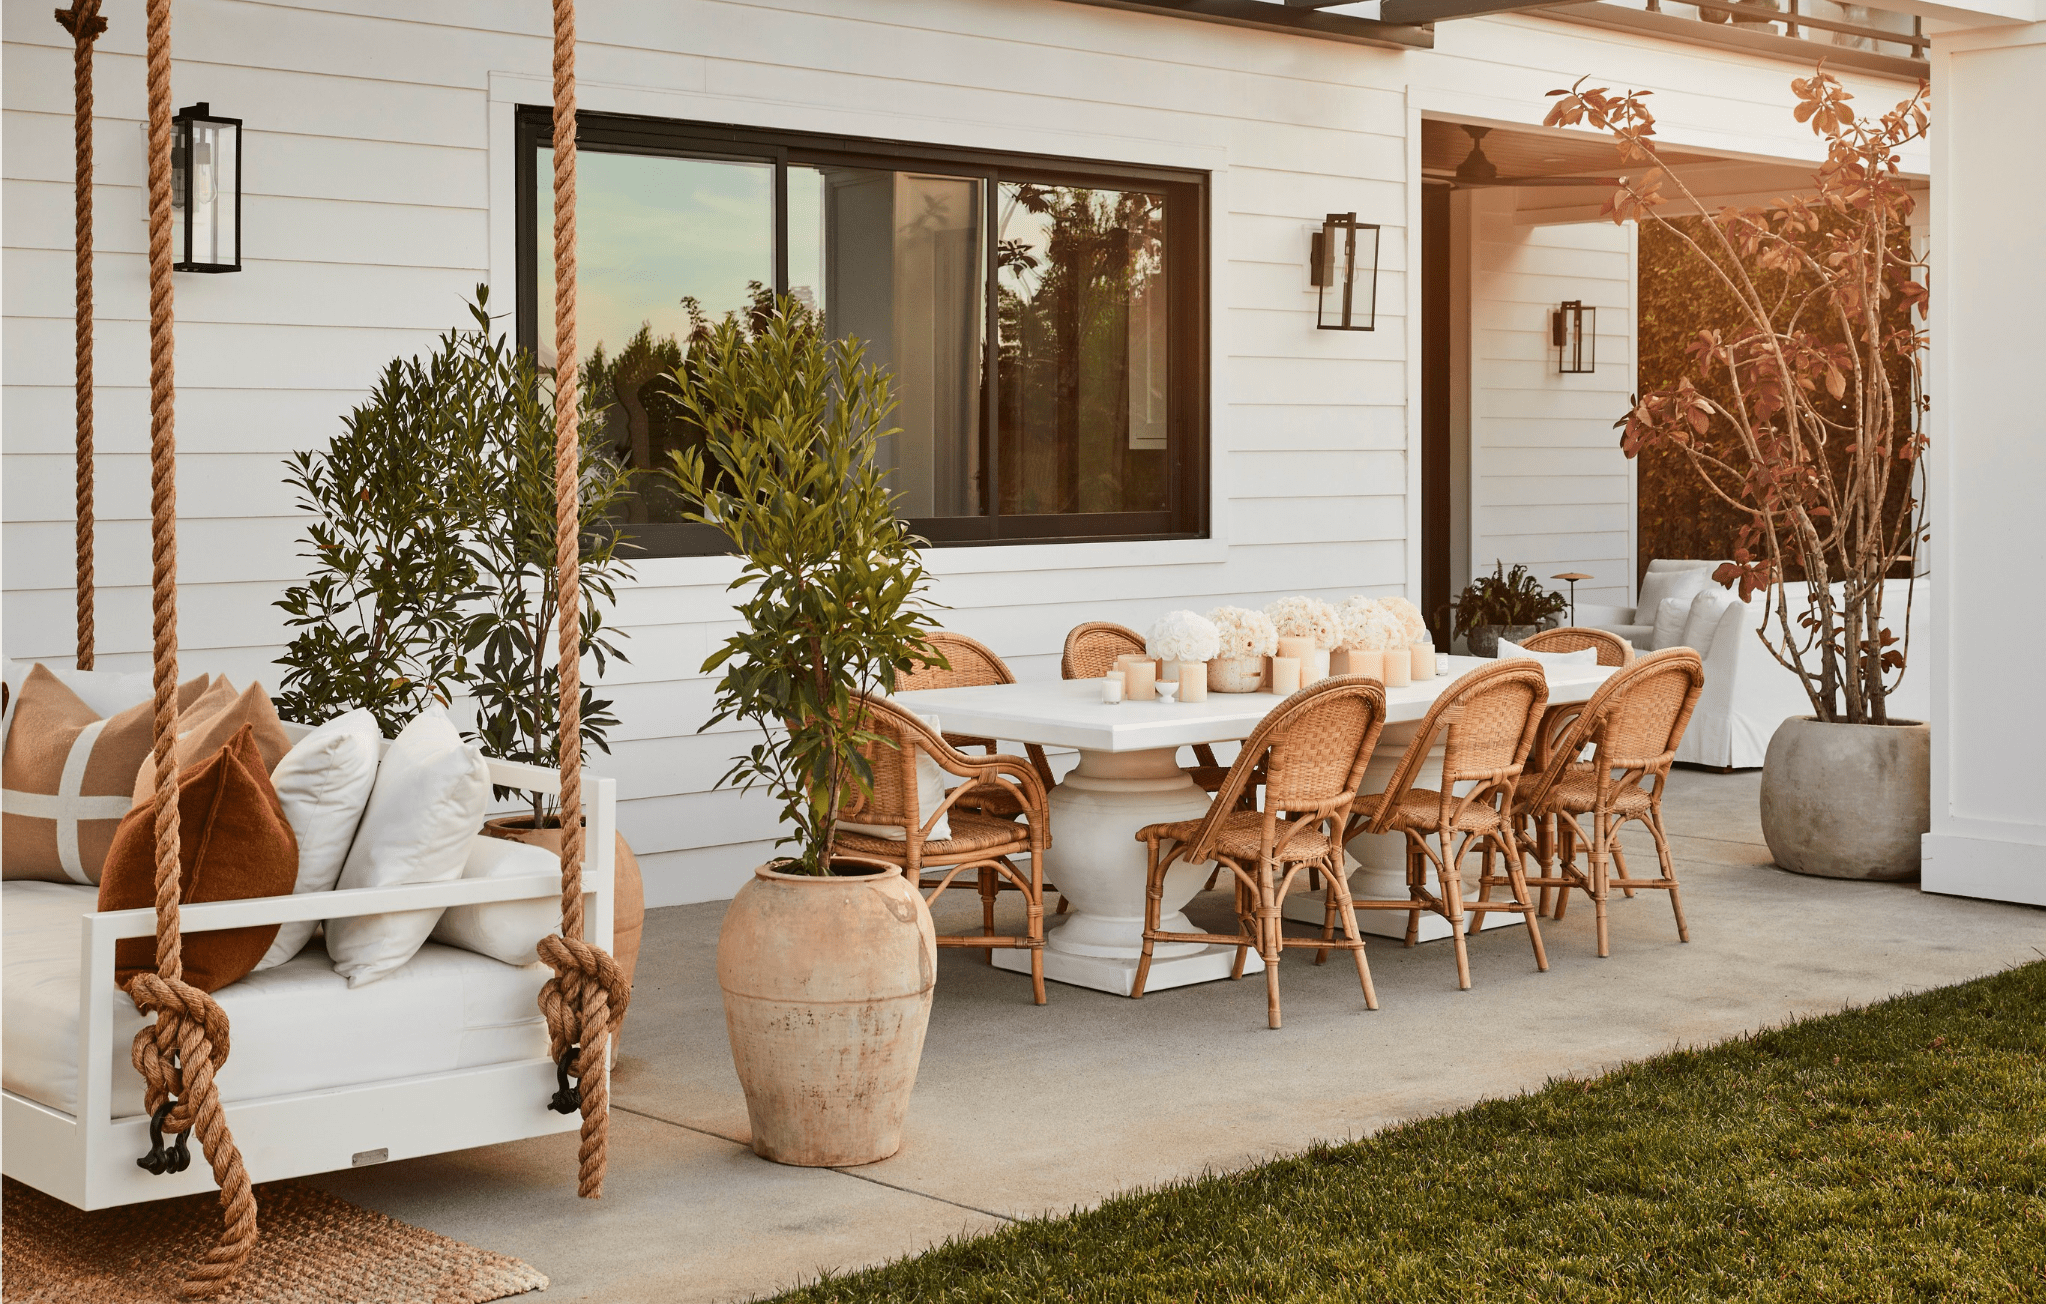 Olivia Culpo outdoor area with bistro chairs